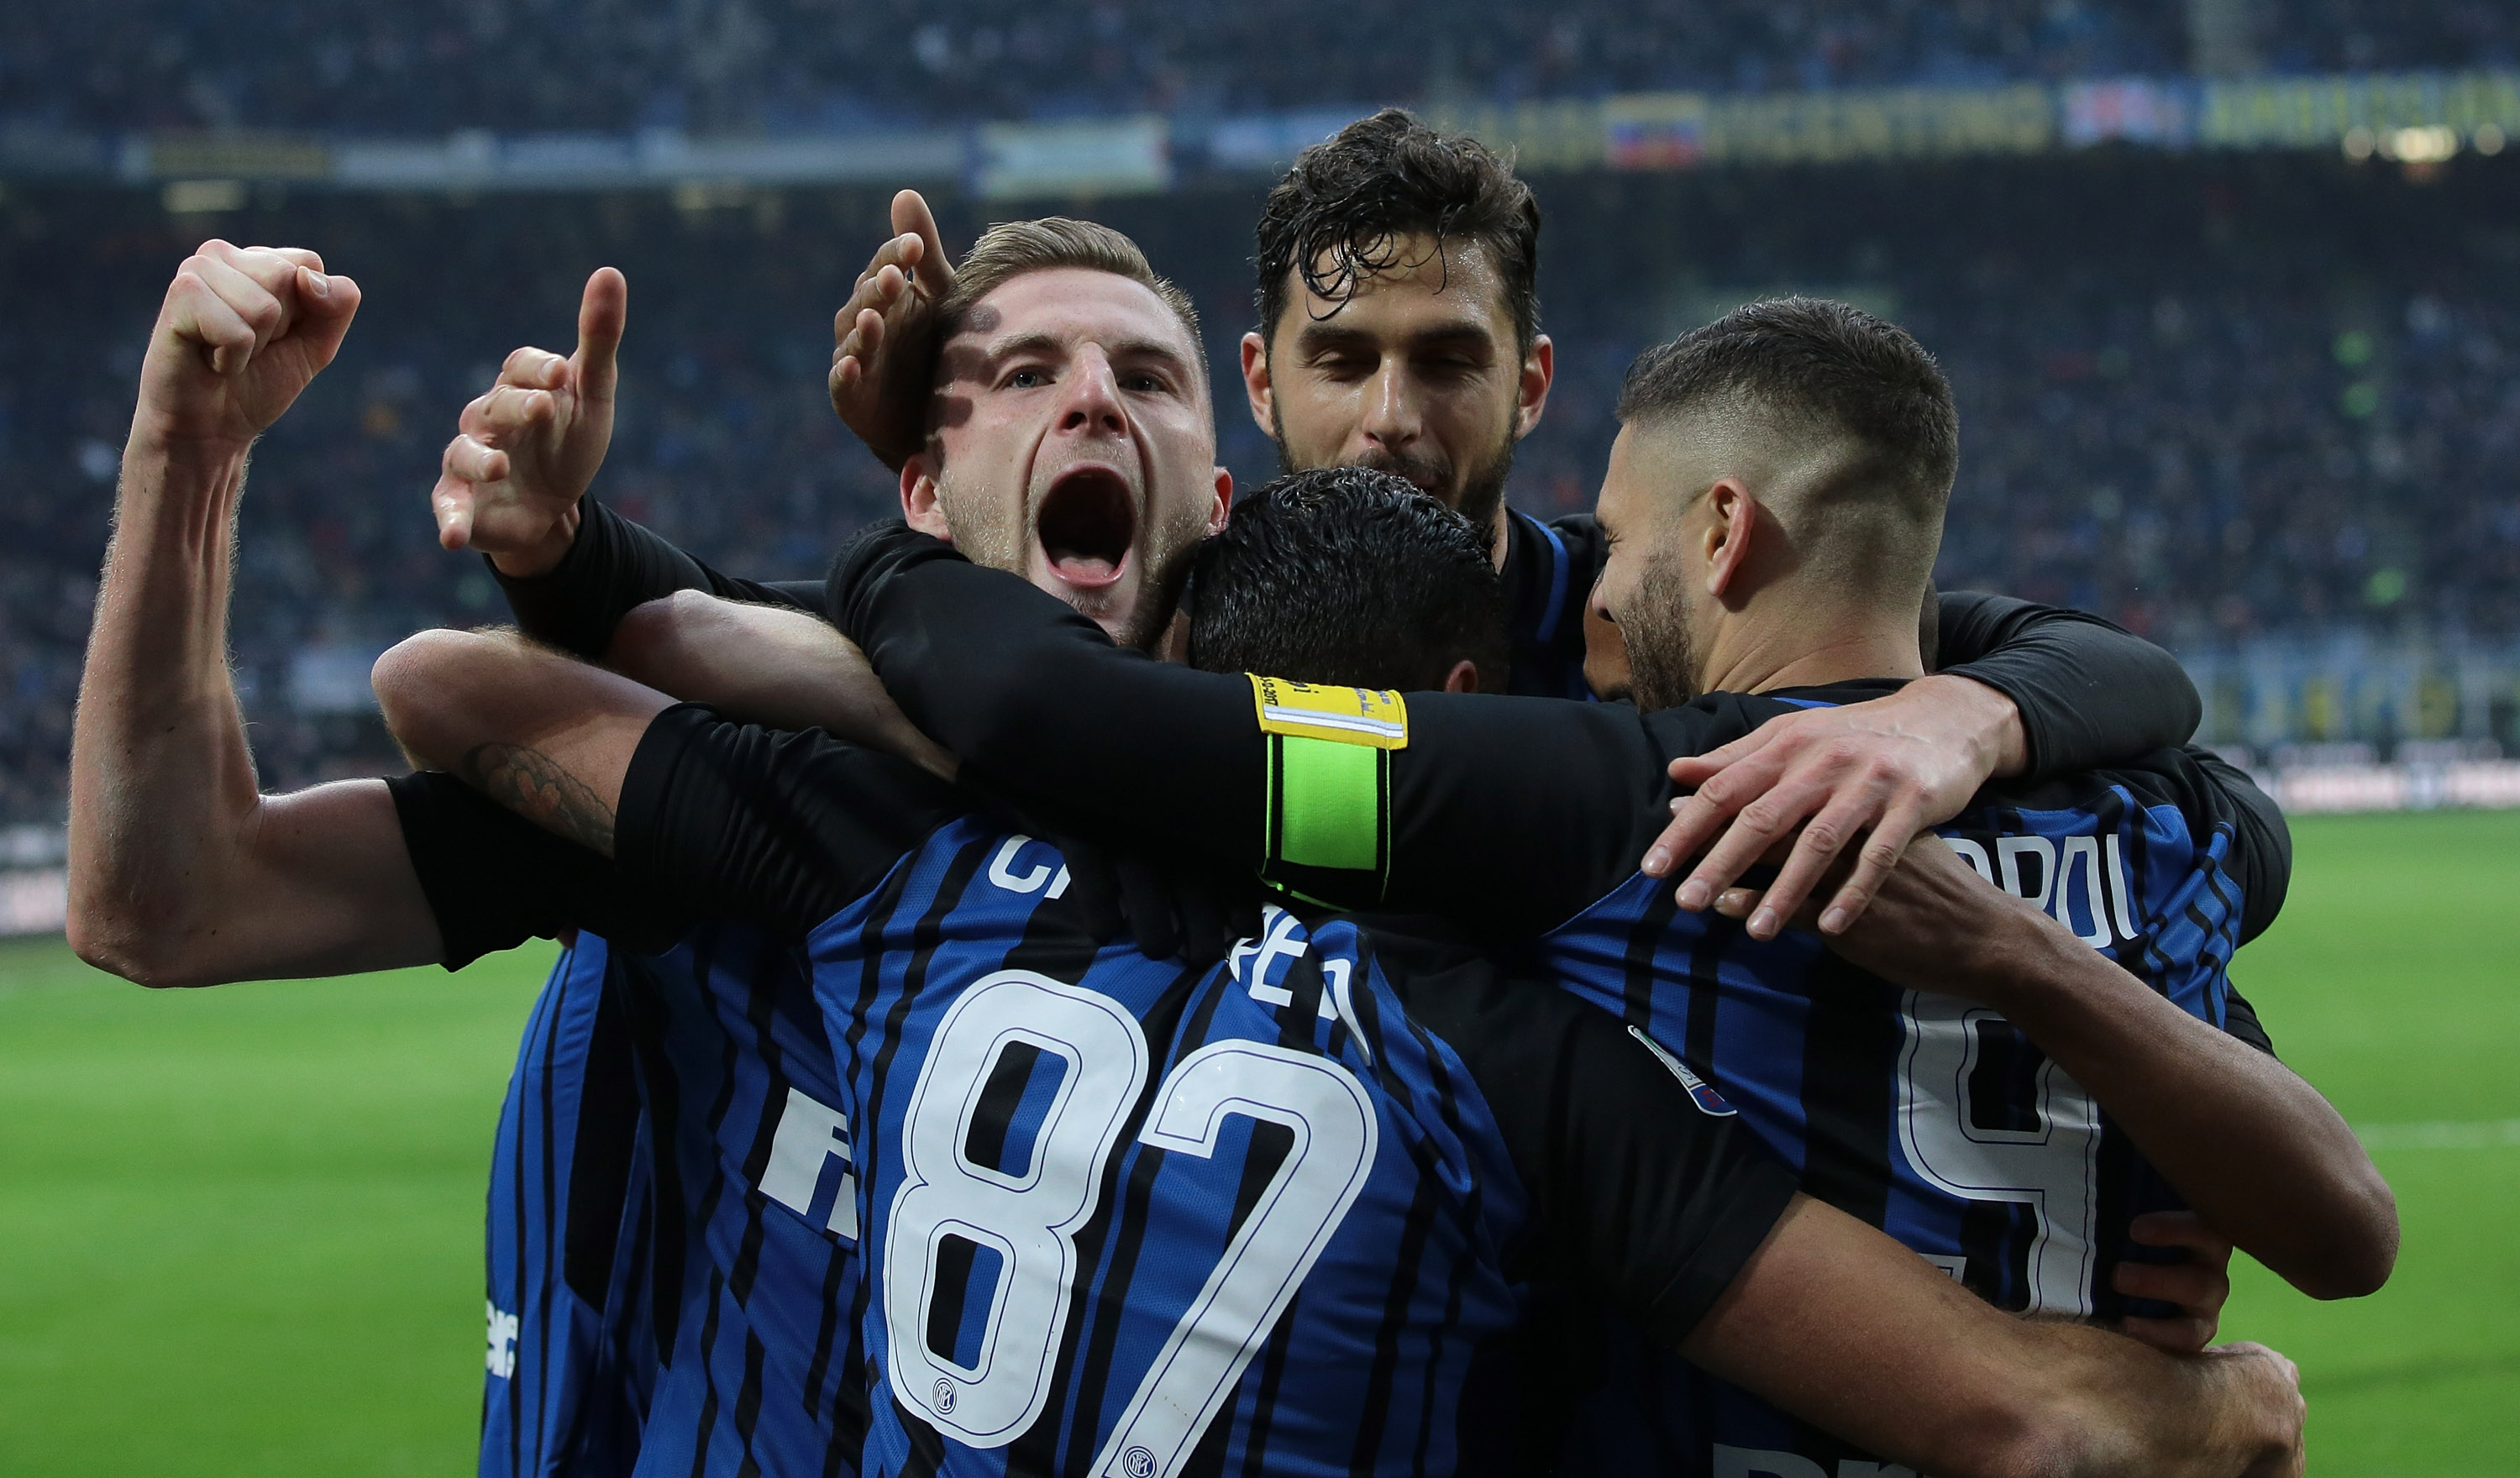 MILAN, ITALY - DECEMBER 03:  Milan Skriniar of FC Internazionale Milano (L) celebrates his goal with his team-mates during the Serie A match between FC Internazionale and AC Chievo Verona at Stadio Giuseppe Meazza on December 3, 2017 in Milan, Italy.  (Photo by Emilio Andreoli/Getty Images)